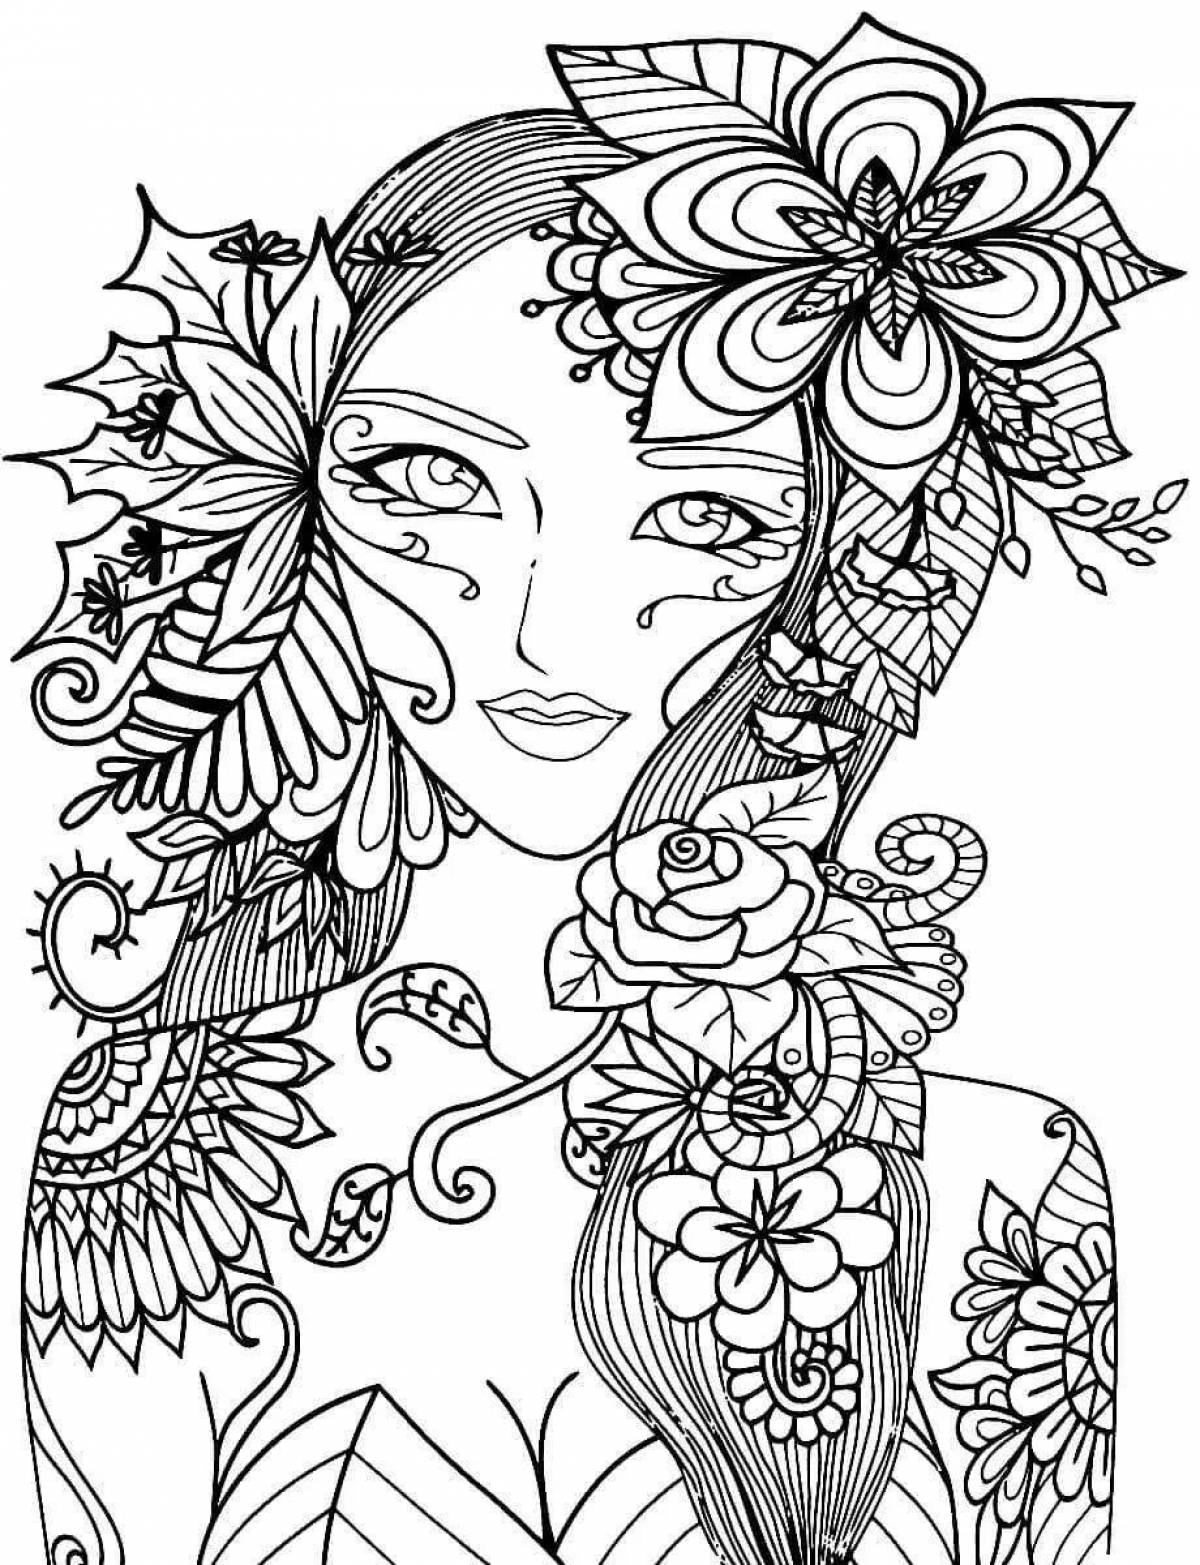 Whimsical anti-stress coloring book for girls